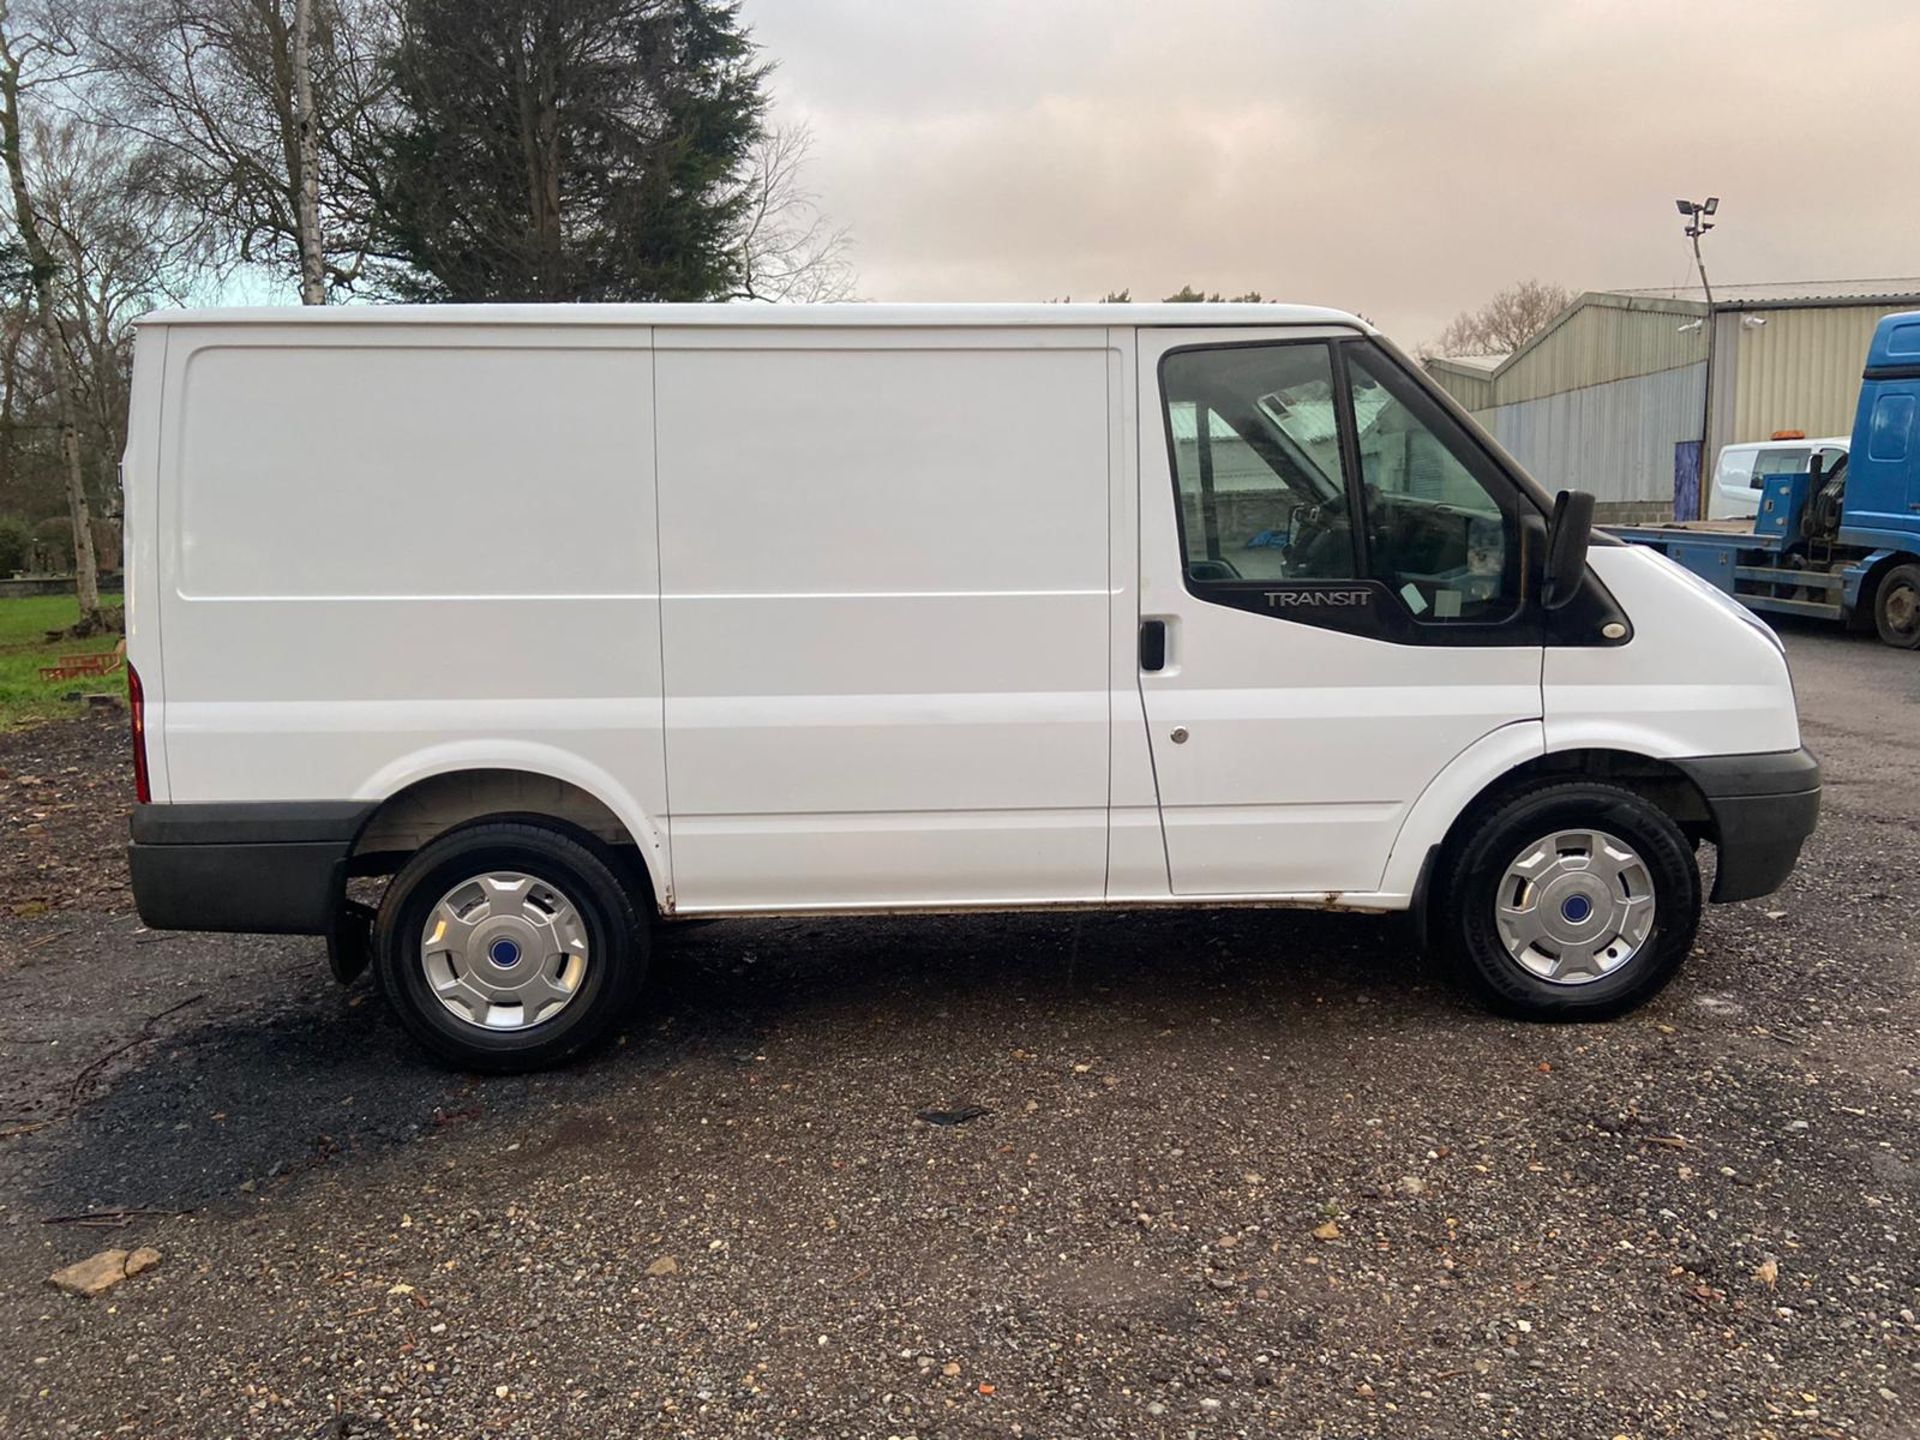 2011/11 REG FORD TRANSIT 115 T280S ECON FW 2.2 DIESEL WHITE PANEL VAN, SHOWING 0 FORMER KEEPERS - Image 7 of 10